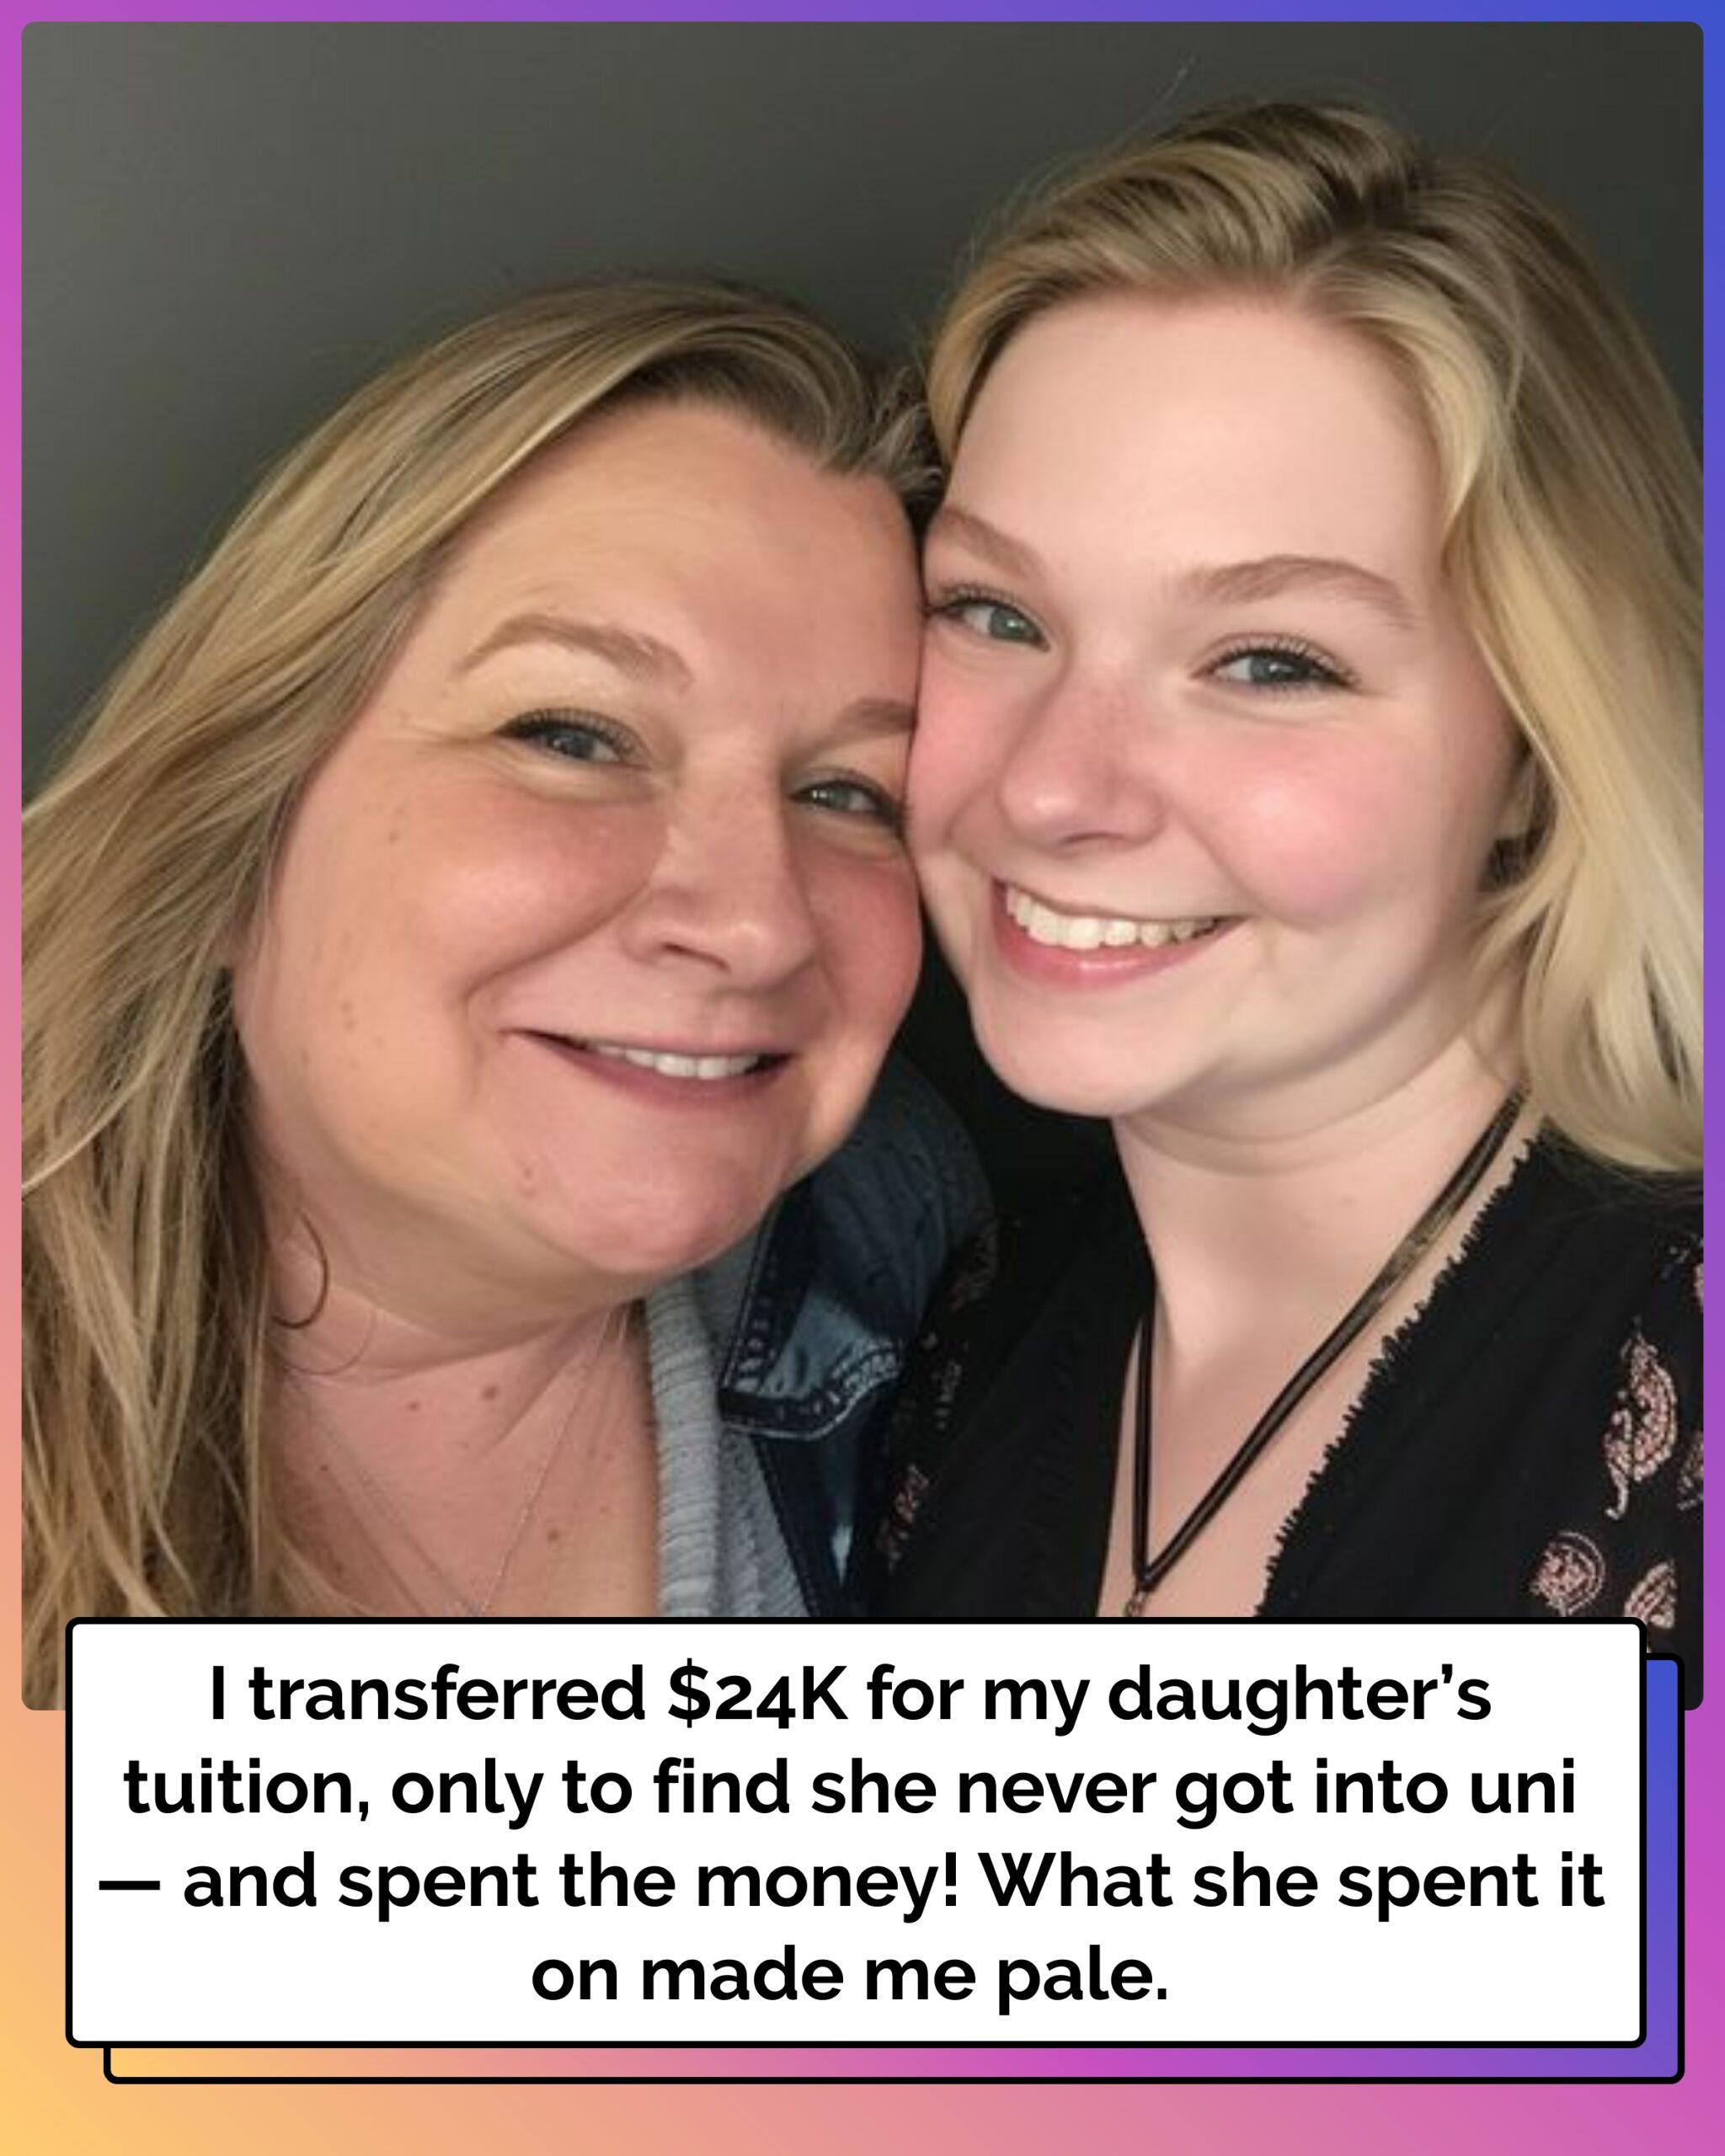 I Transferred $24K to My Daughter for Her College Tuition, Only to Discover She Never Enrolled — What She Spent It On Made Me Pale